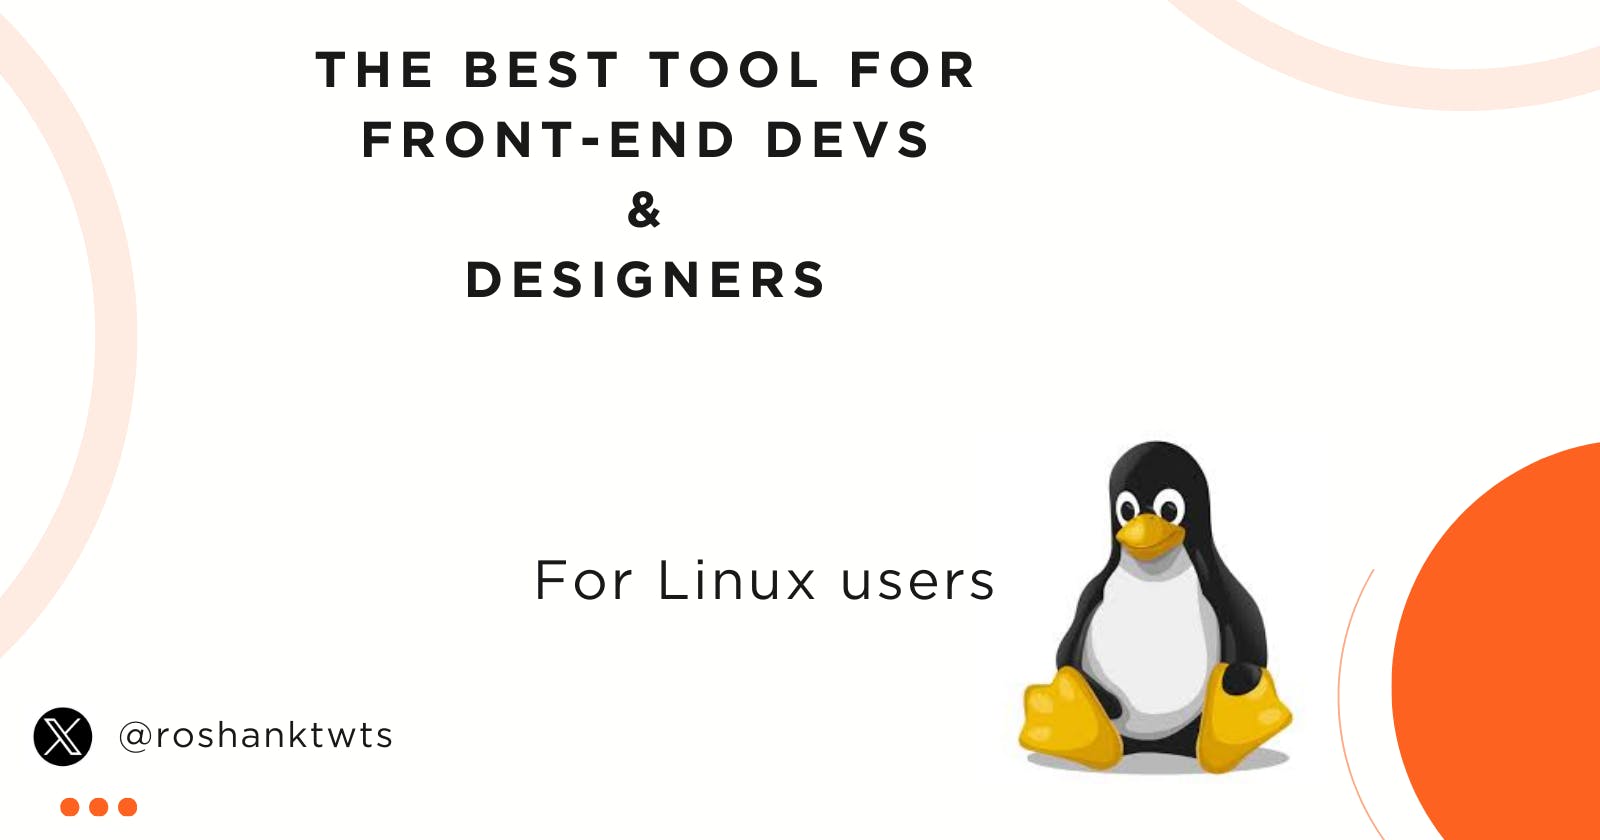 A useful tool for Front-end devs and designers using Linux